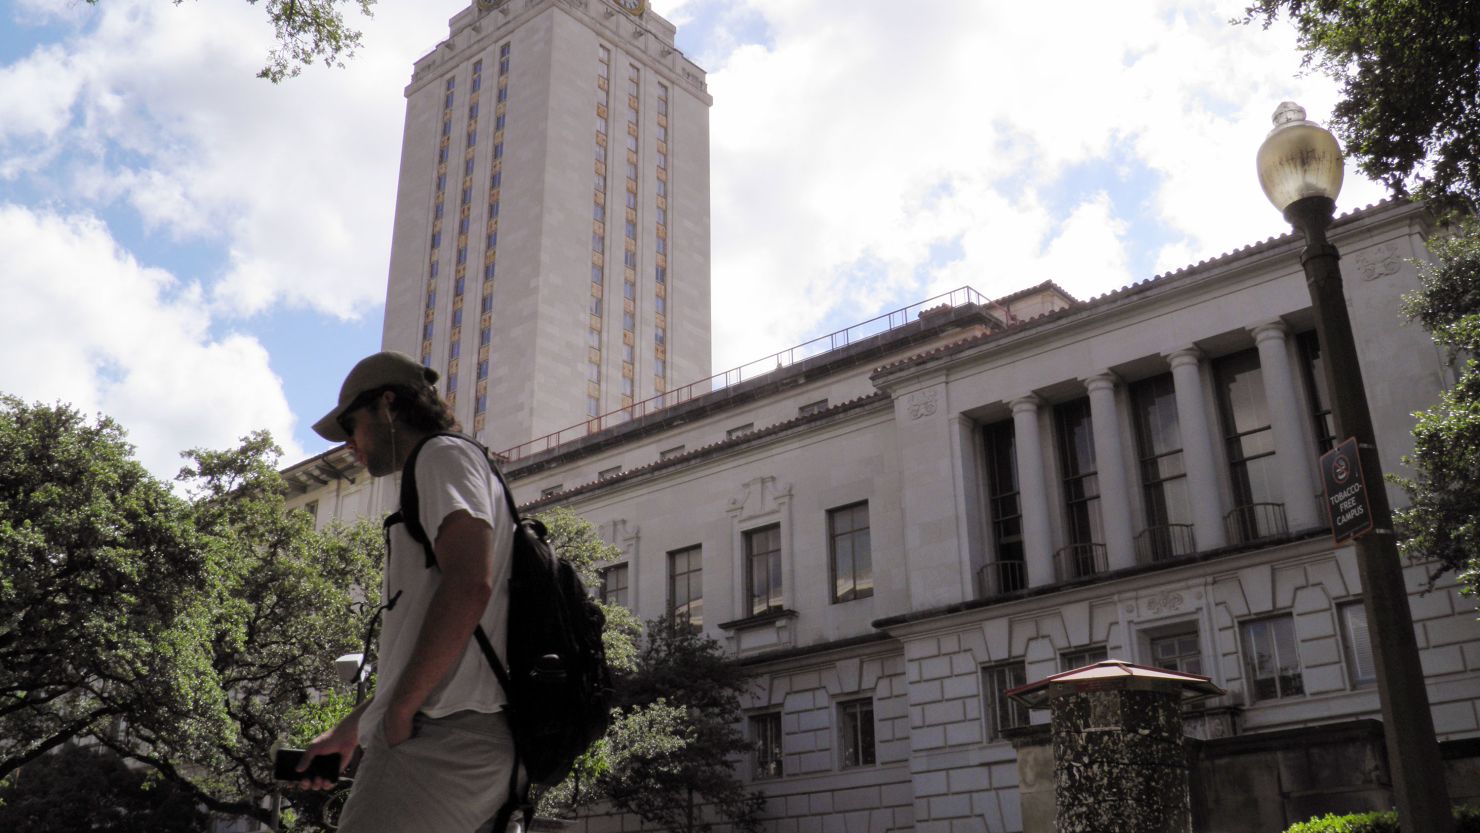 A student walks at the University of Texas campus in Austin, Texas, June 23, 2016.